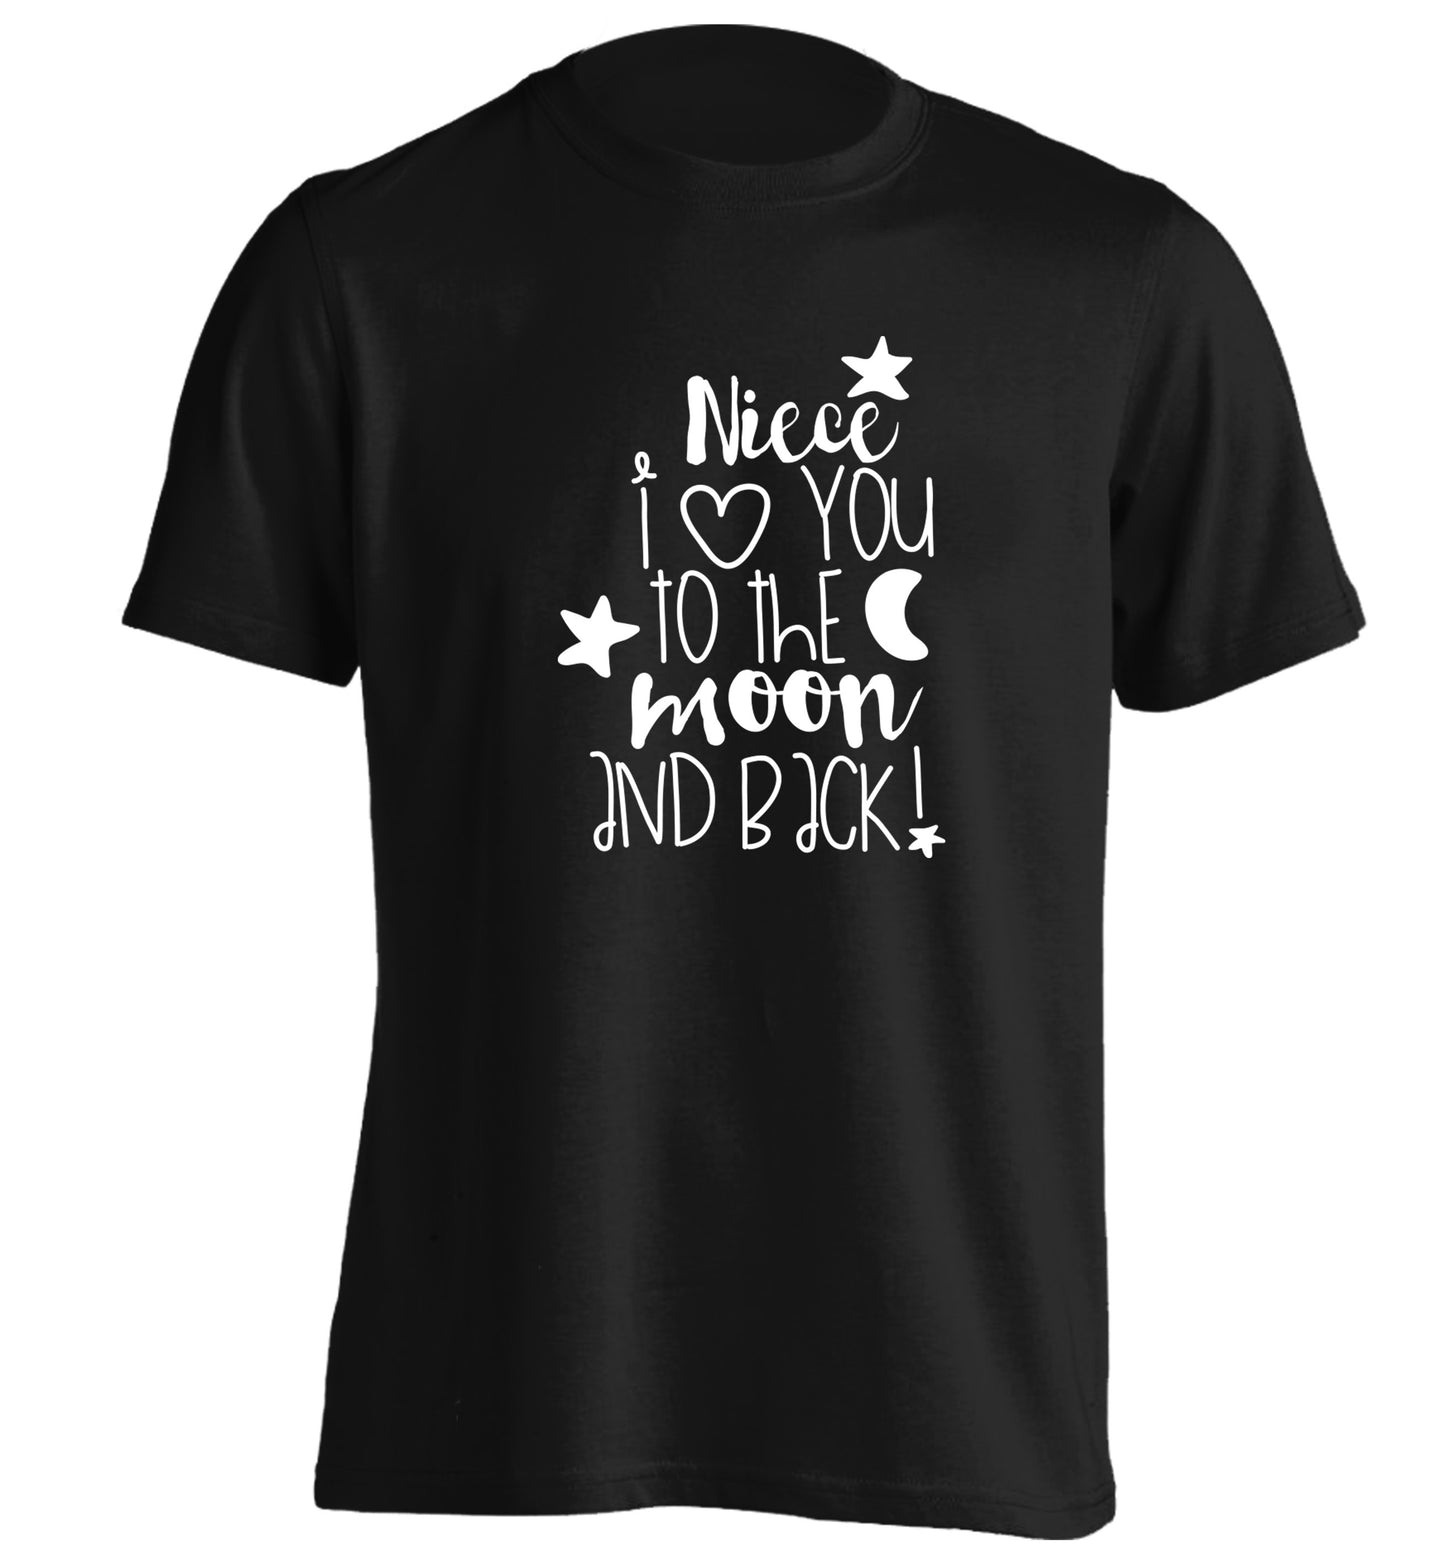 Niece I love you to the moon and back adults unisex black Tshirt 2XL